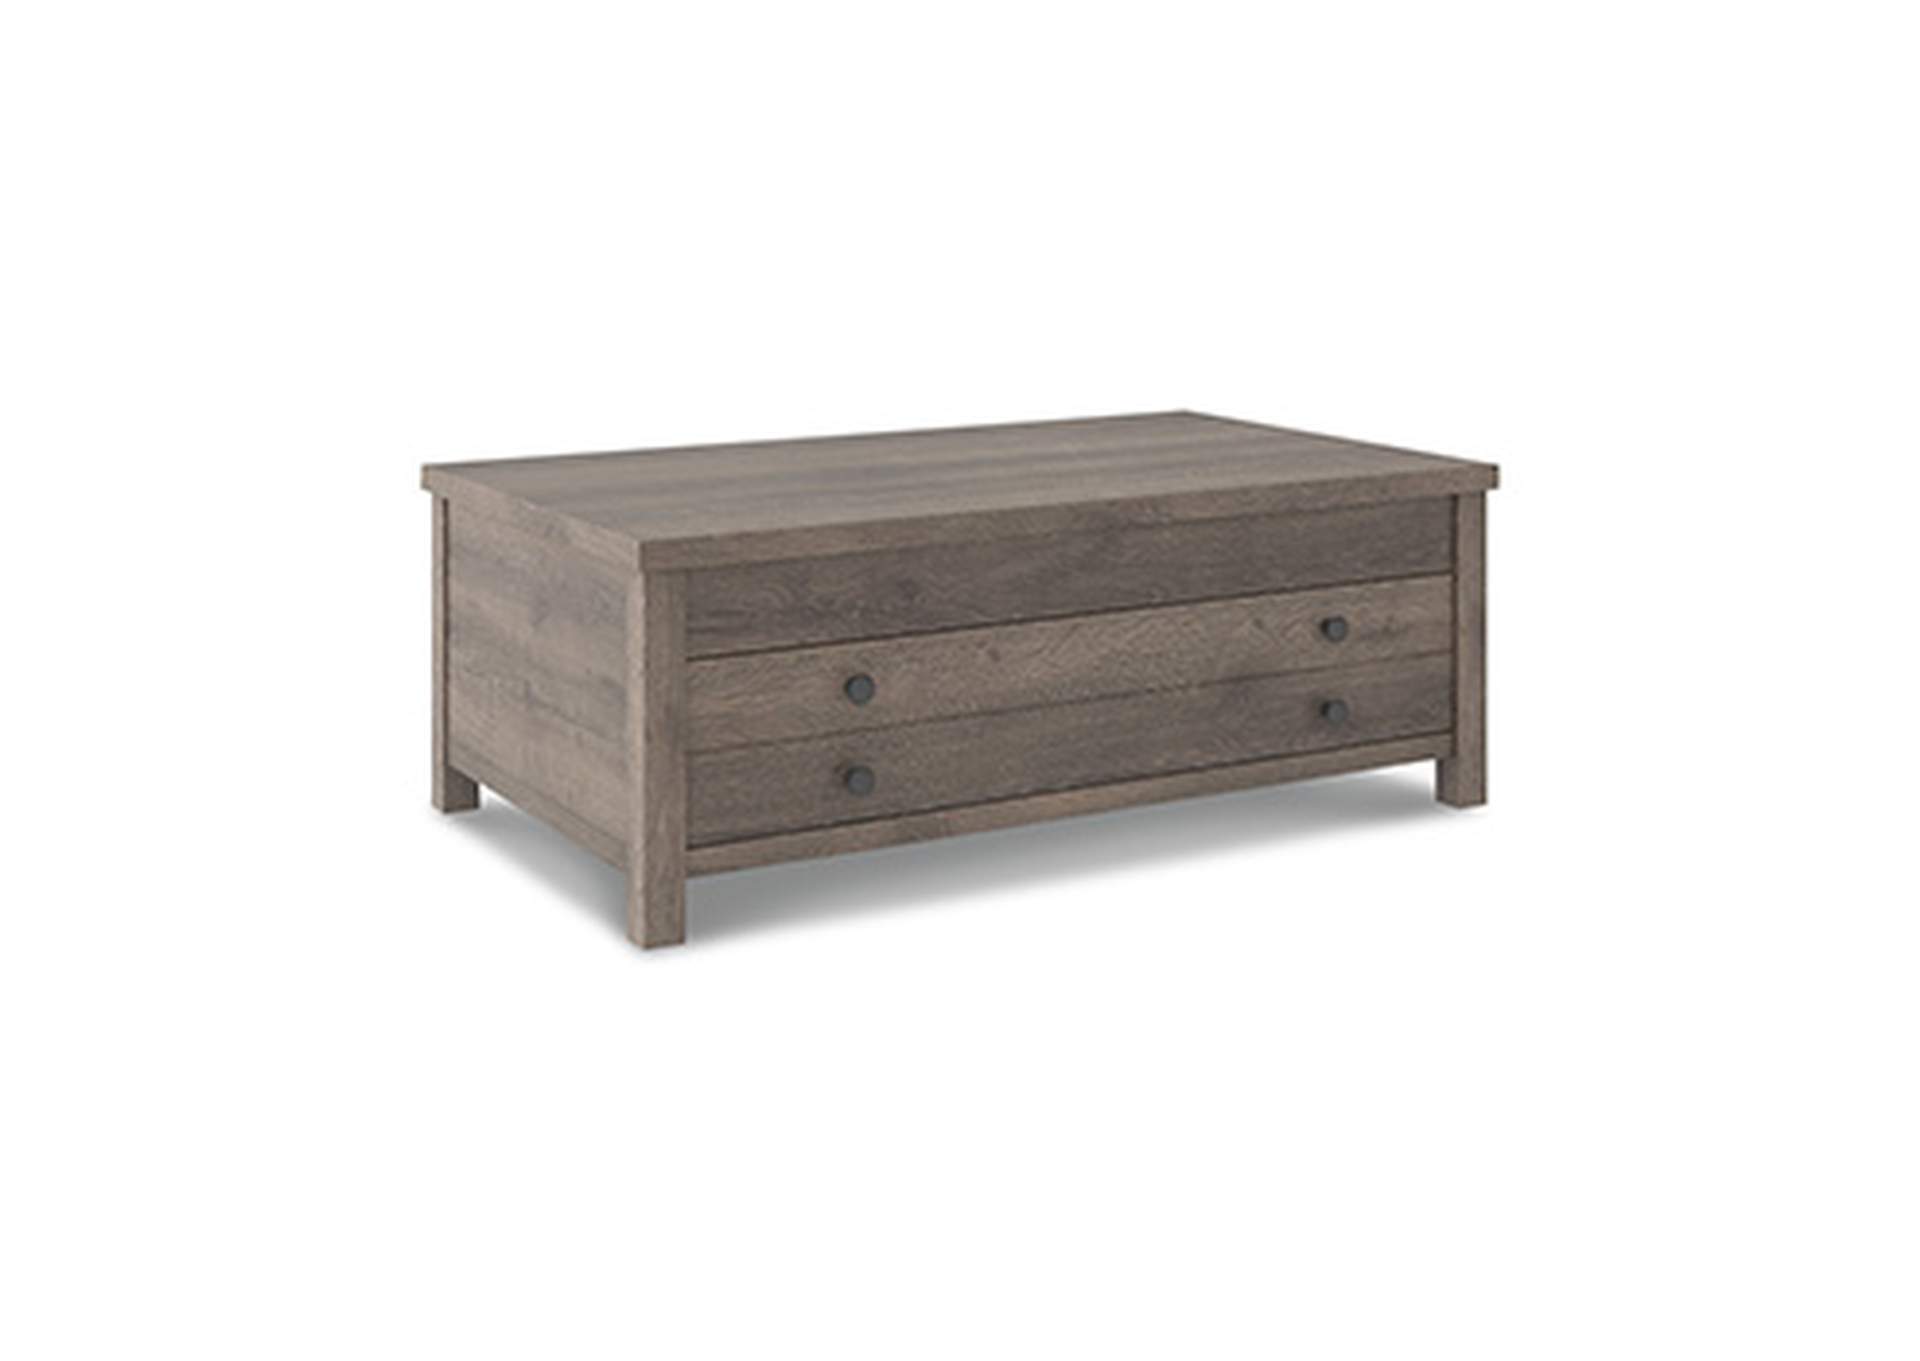 Arlenbry Coffee Table with Lift Top,Signature Design By Ashley